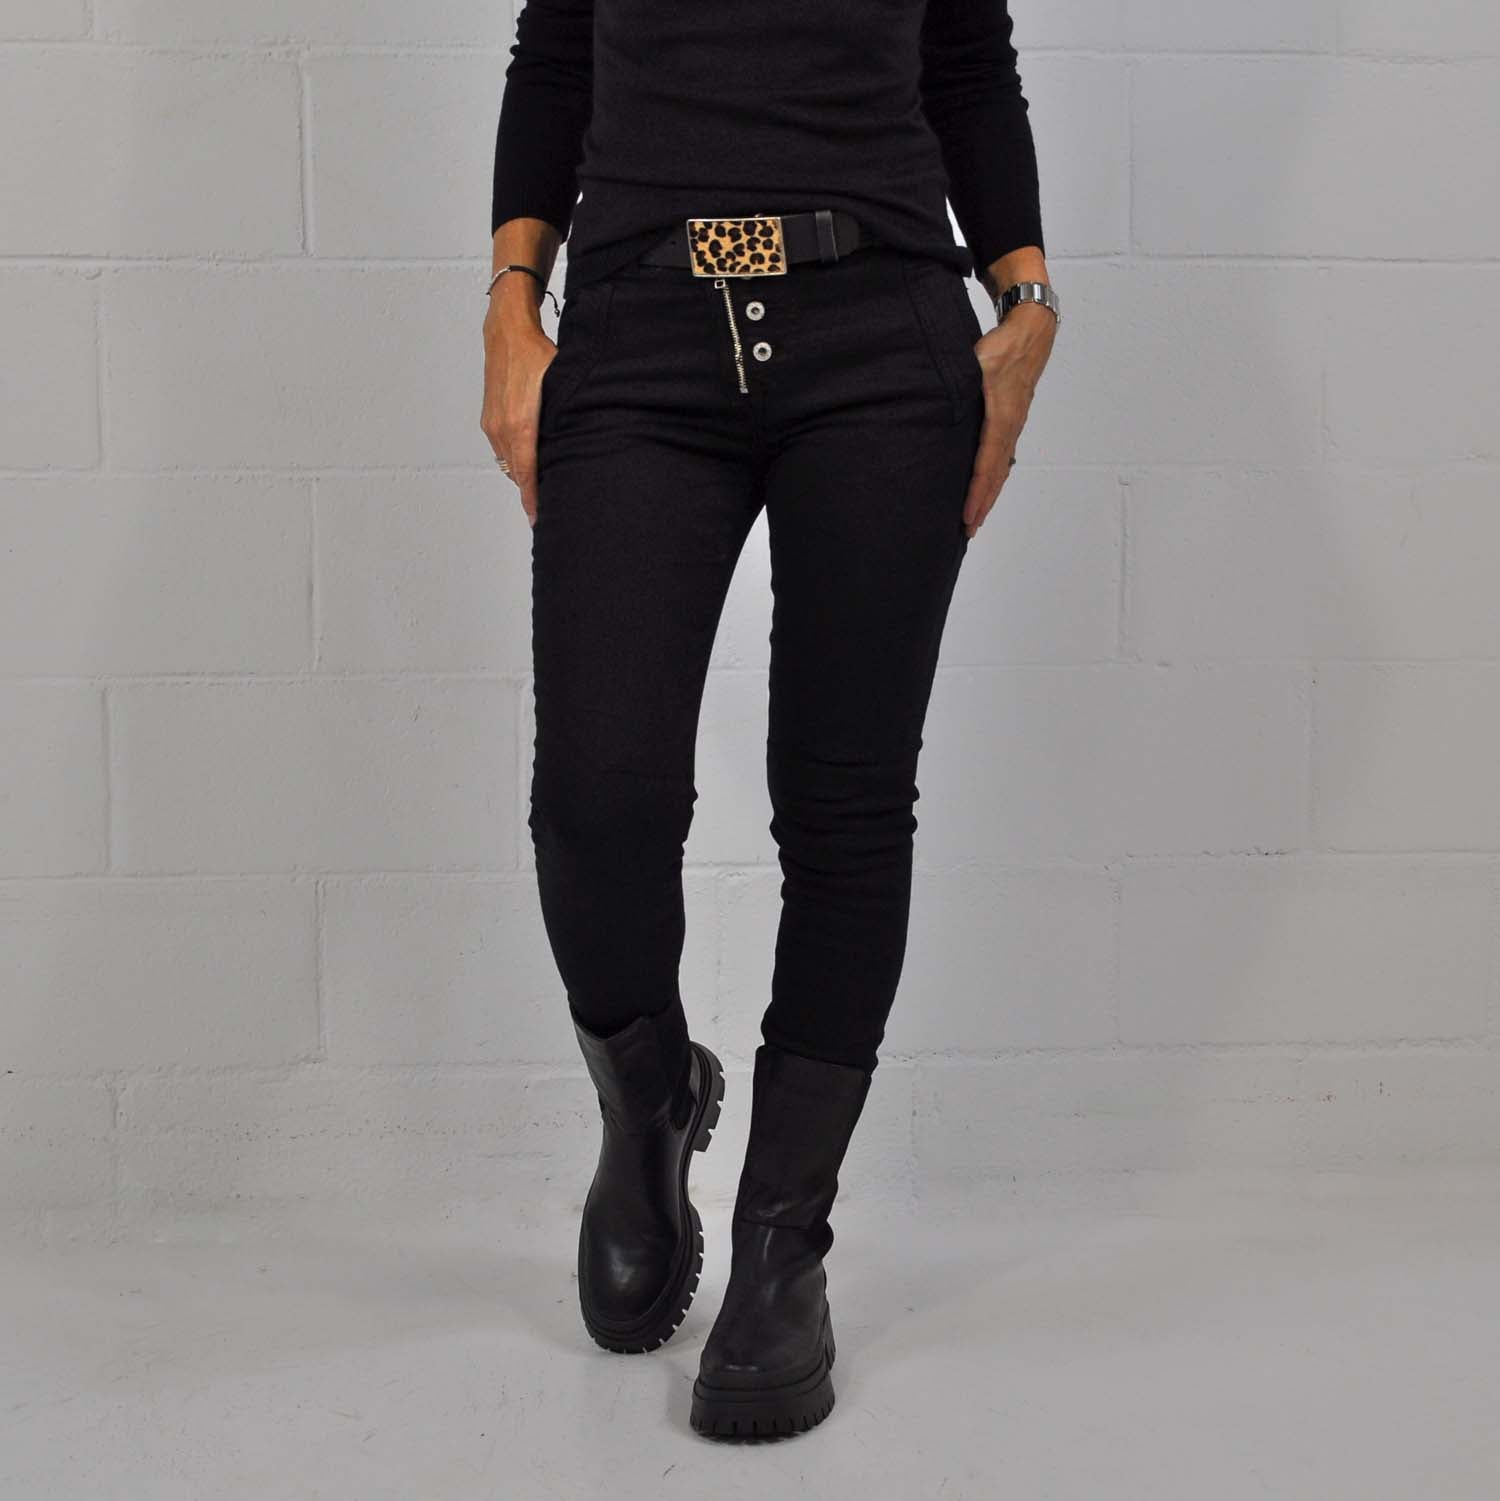 Black zip and buttons pants